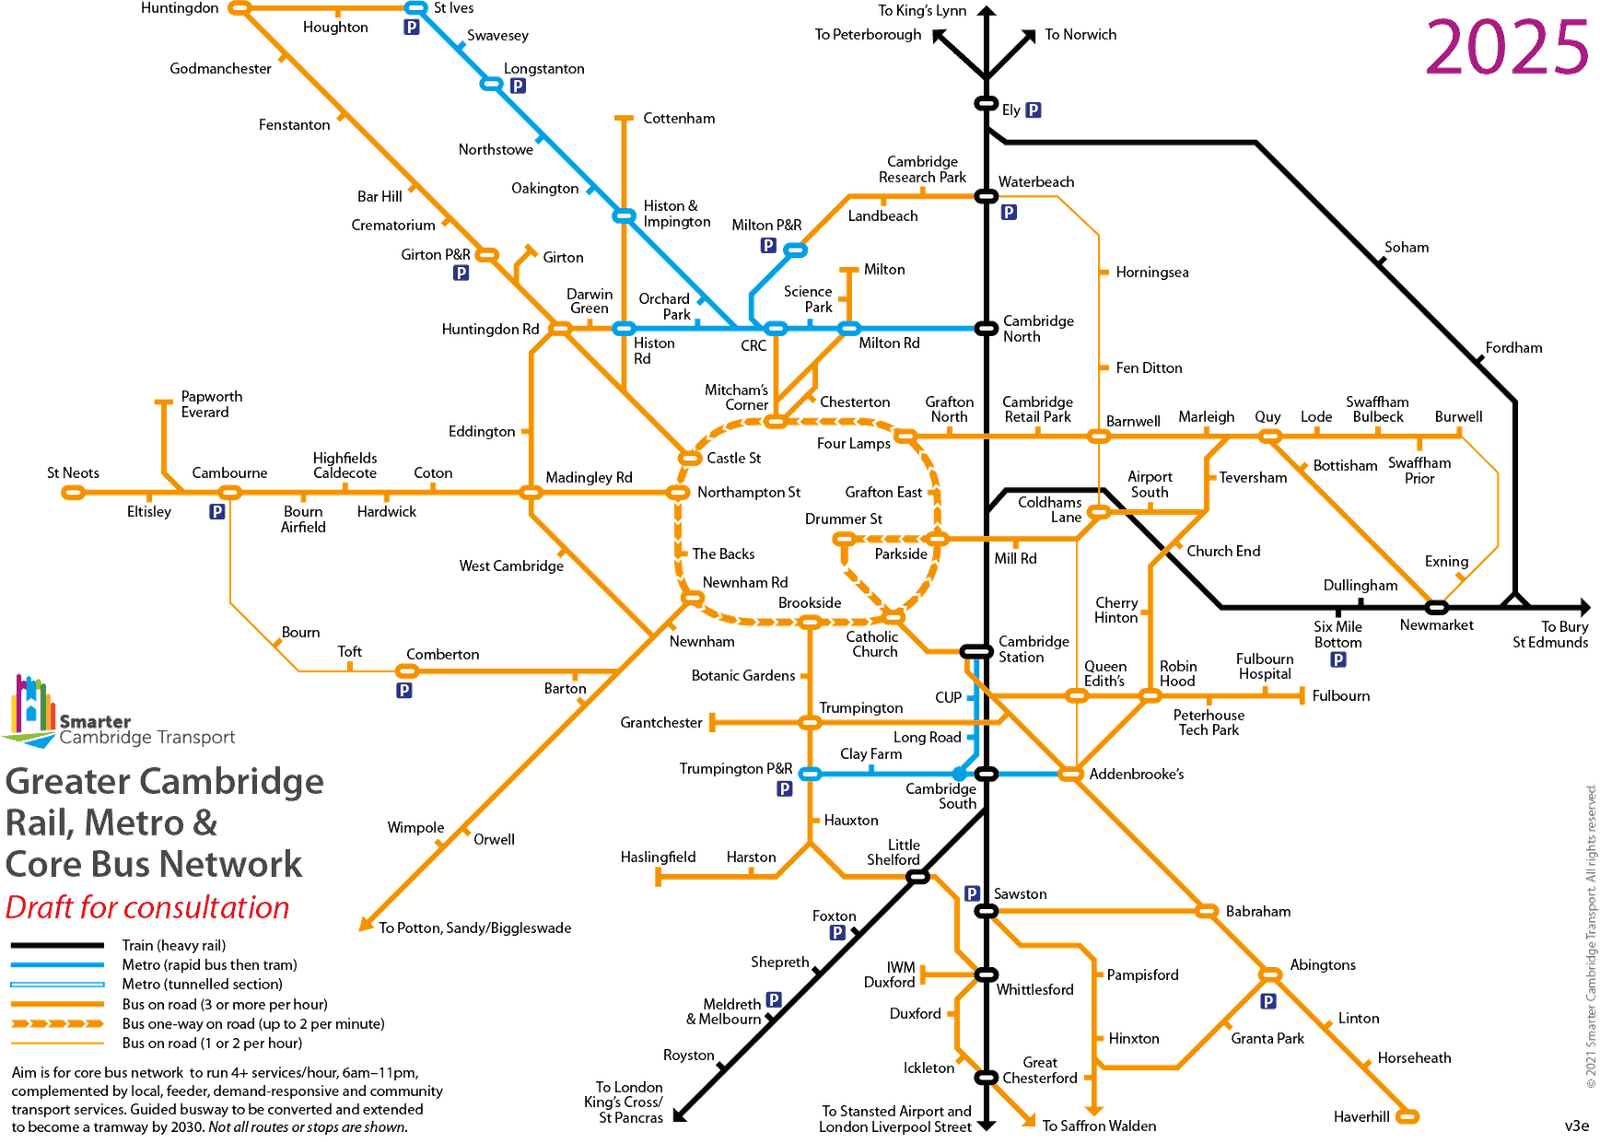 Schematic map of modified rail and bus network in Cambridge in 2025 with new rail stations